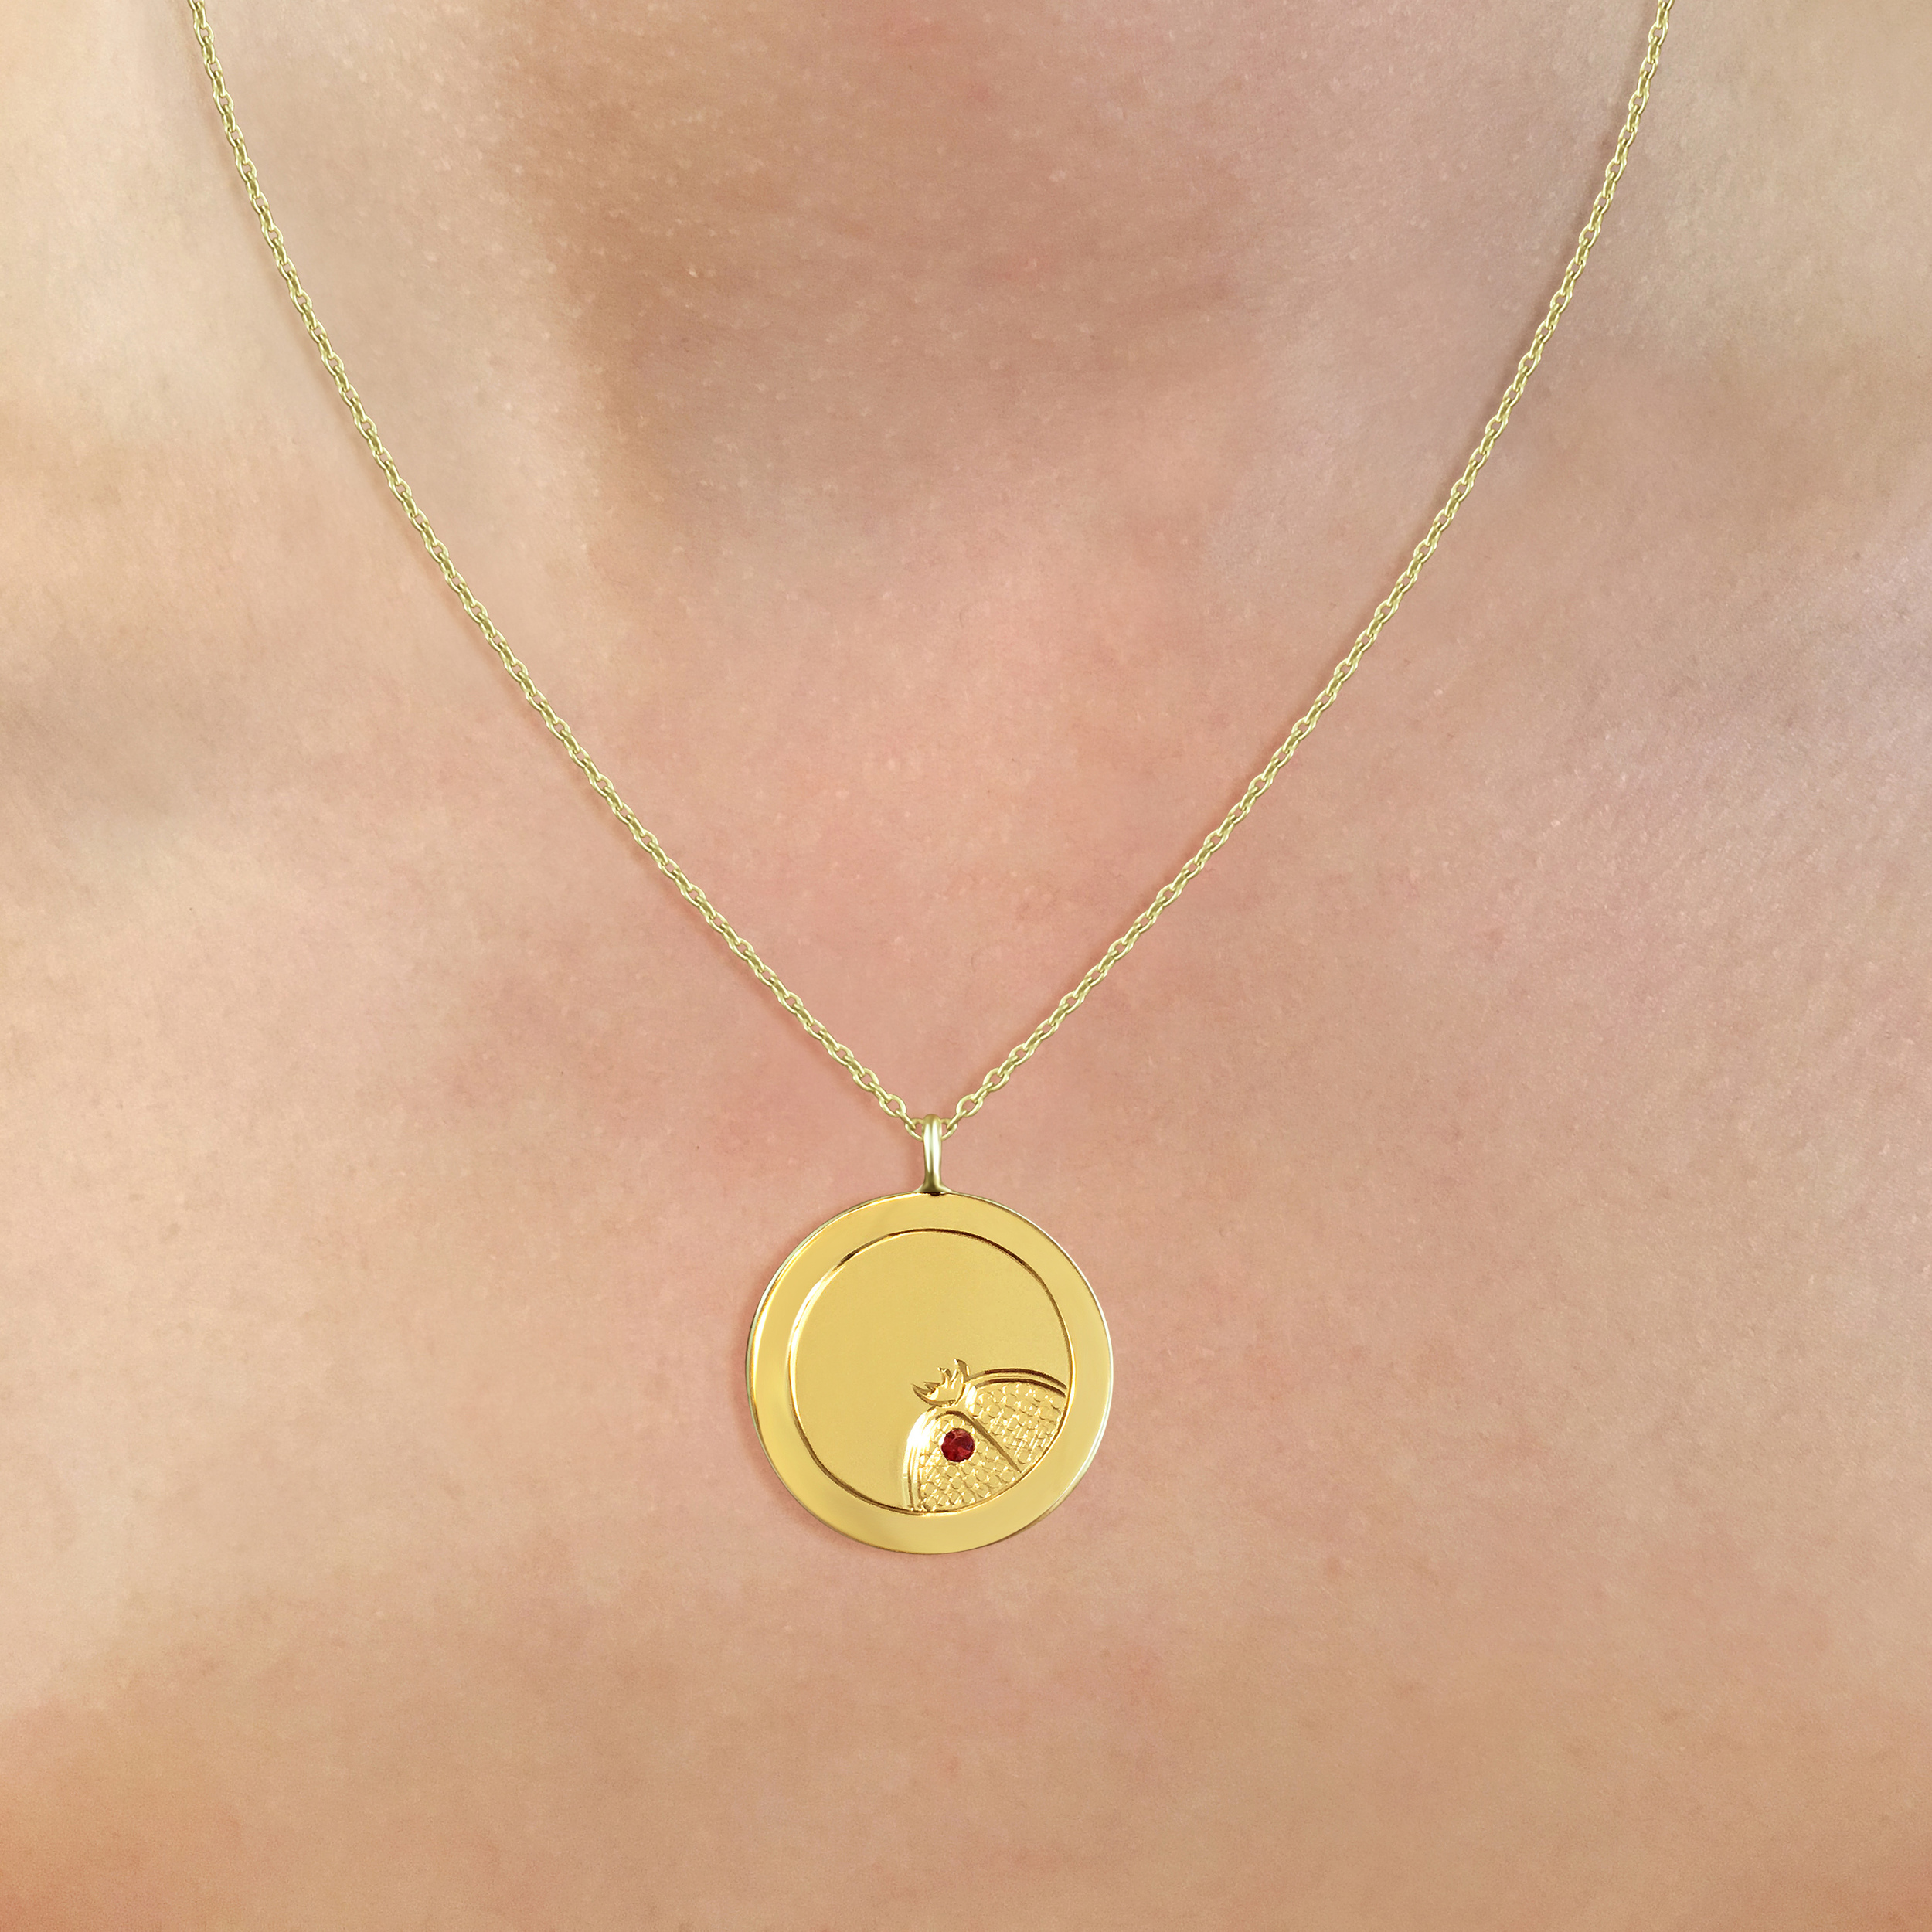 Bespoke-9ct-yellow-gold-disc-pendant-with-hand-engraved-pomegranate-1.jpg